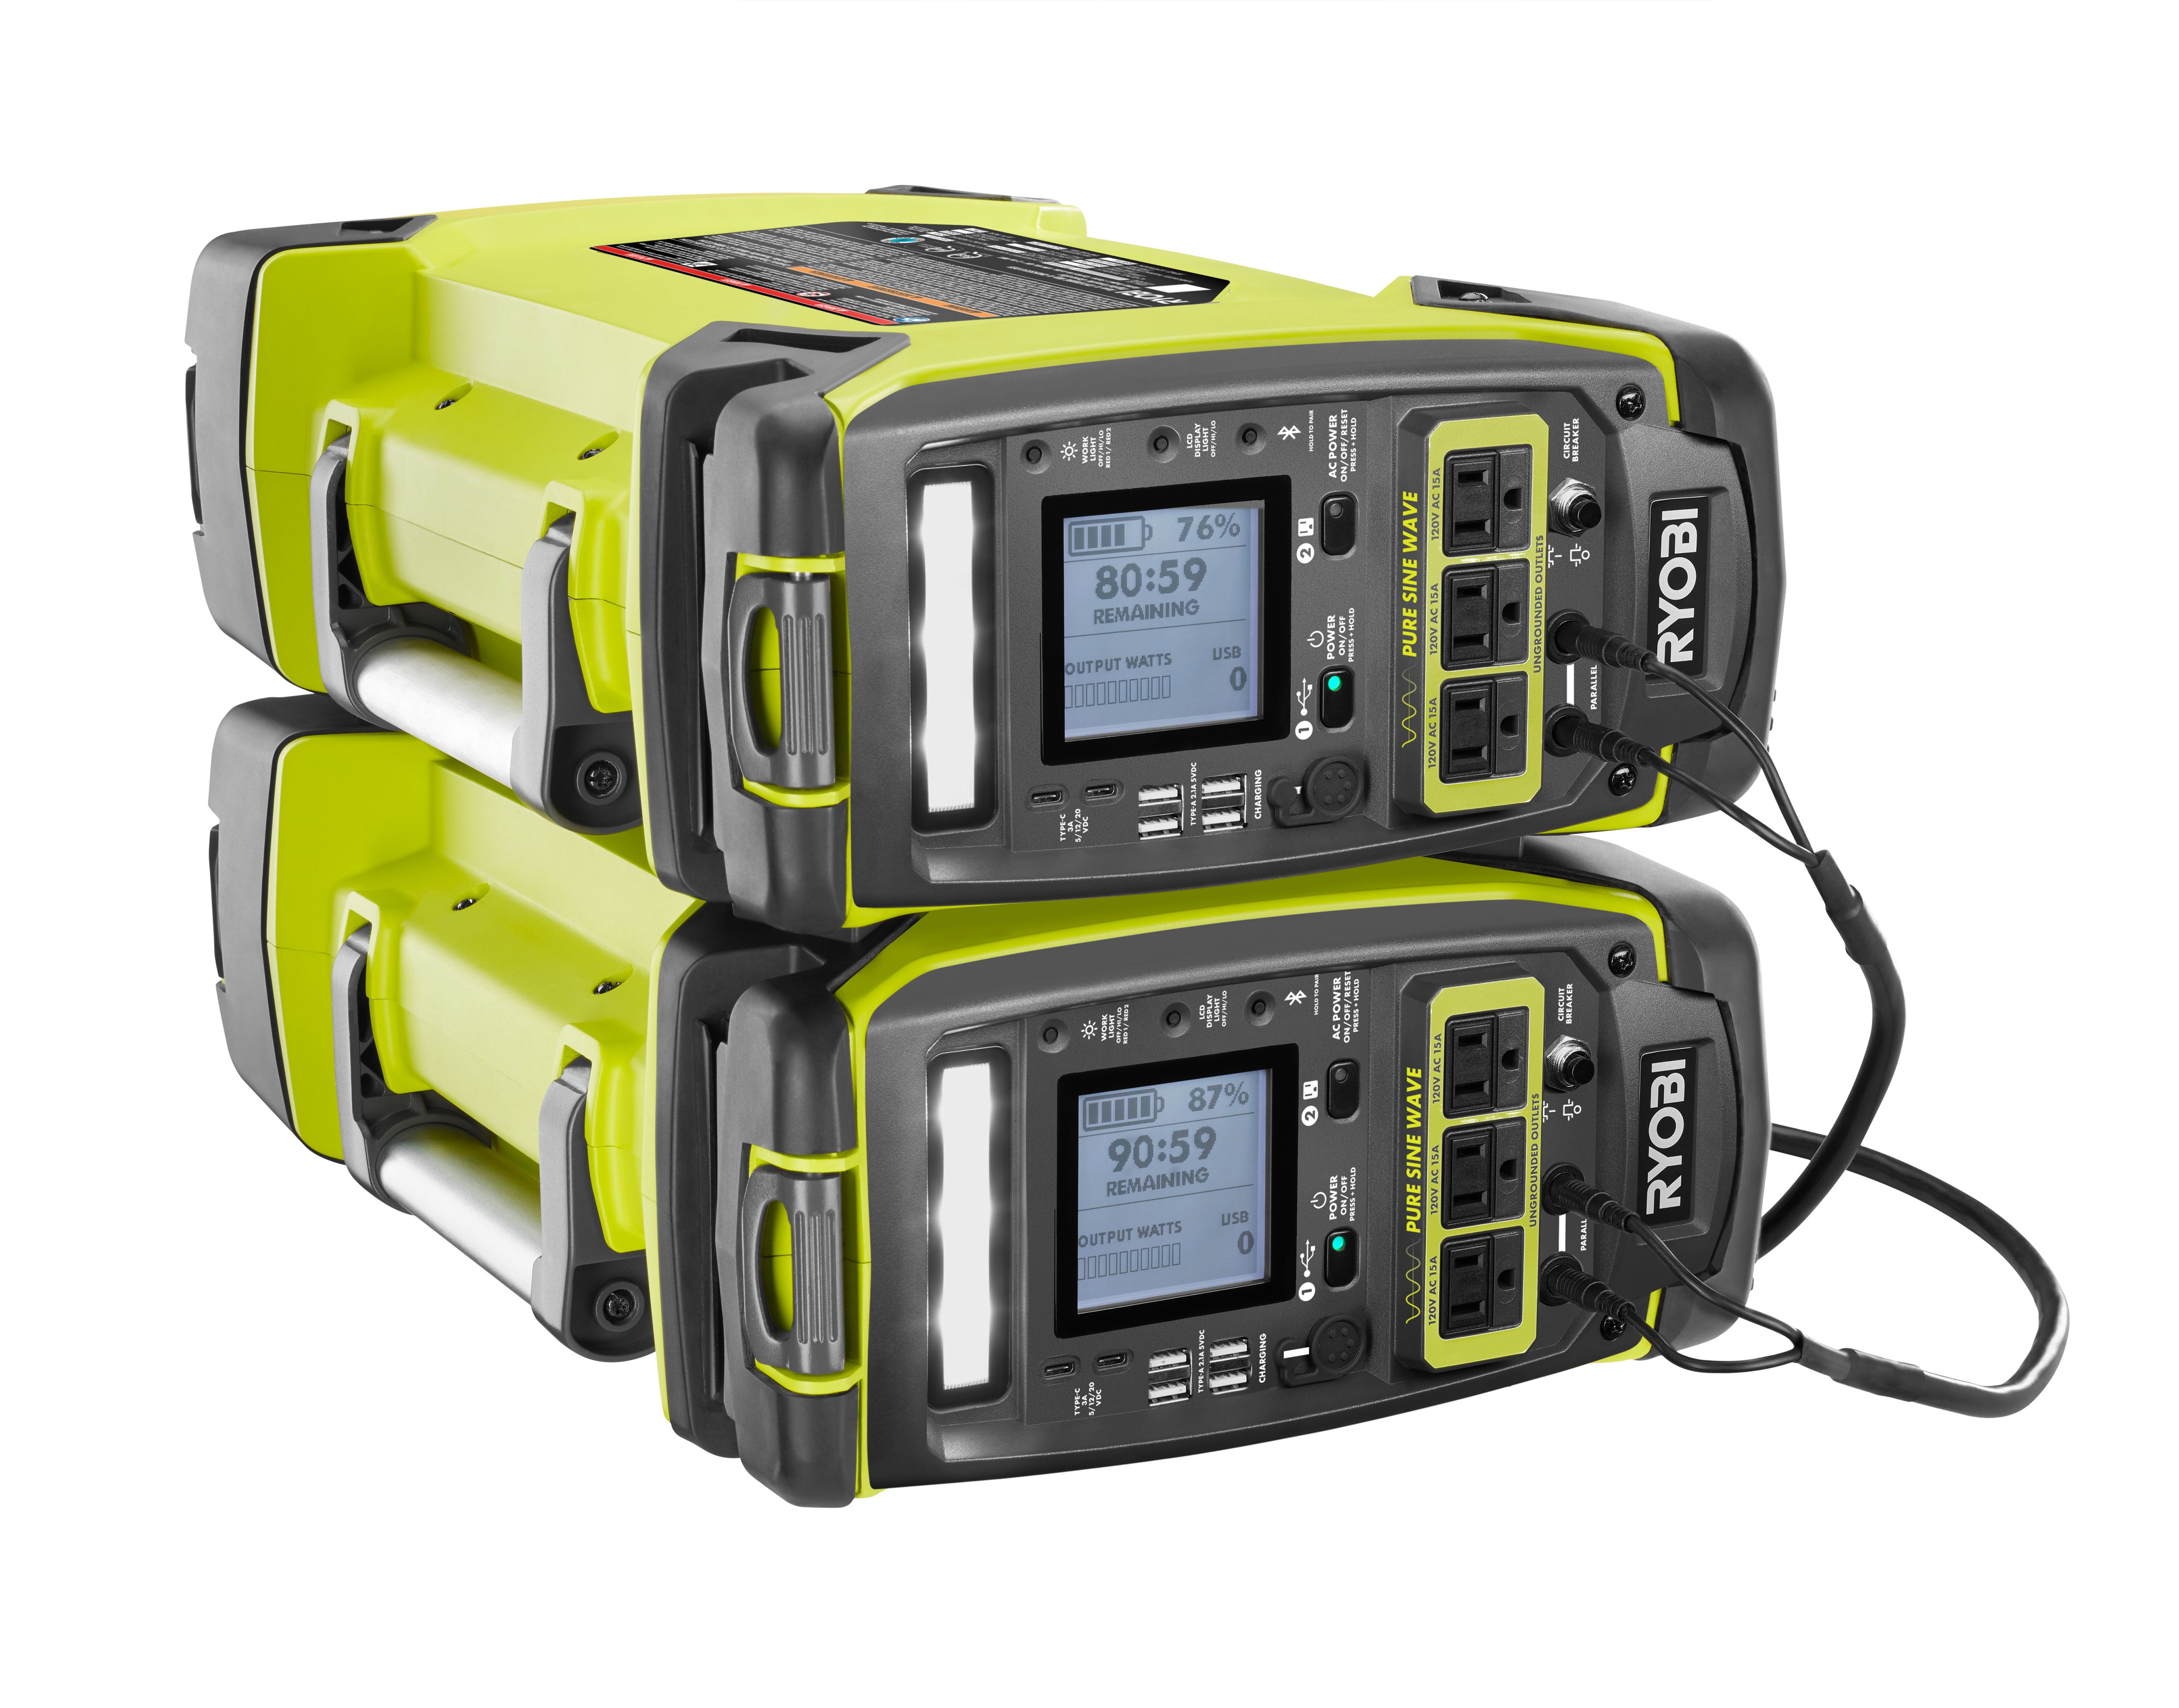 1800 Watt Portable Power Station and Simultaneous Battery Charger